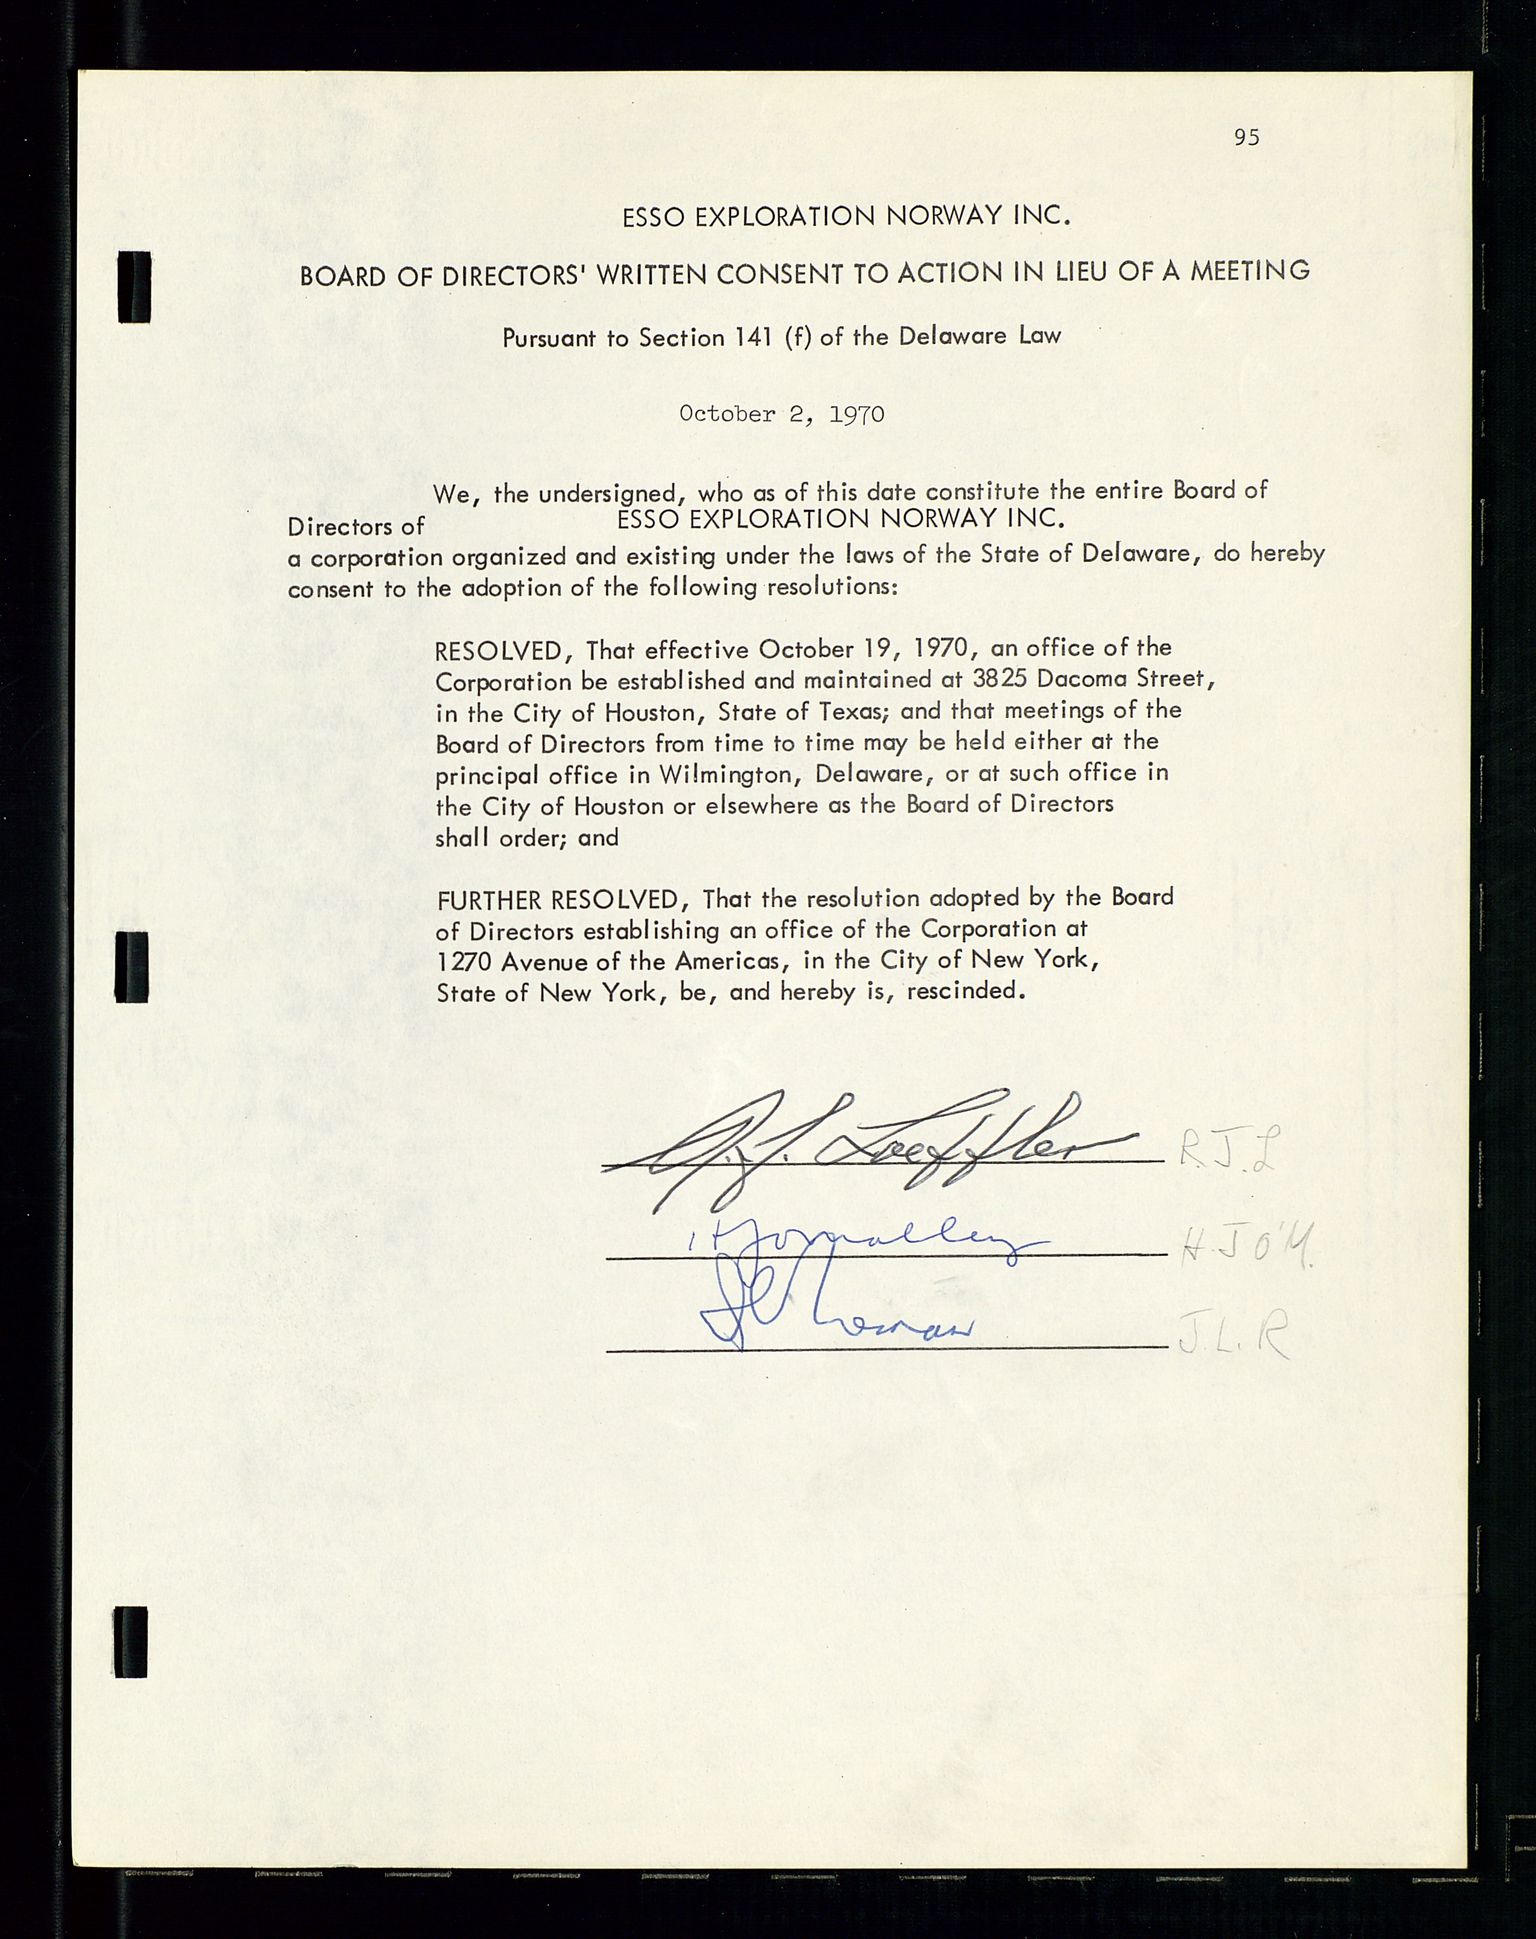 Pa 1512 - Esso Exploration and Production Norway Inc., SAST/A-101917/A/Aa/L0001/0001: Styredokumenter / Corporate records, By-Laws, Board meeting minutes, Incorporations, 1965-1975, s. 95